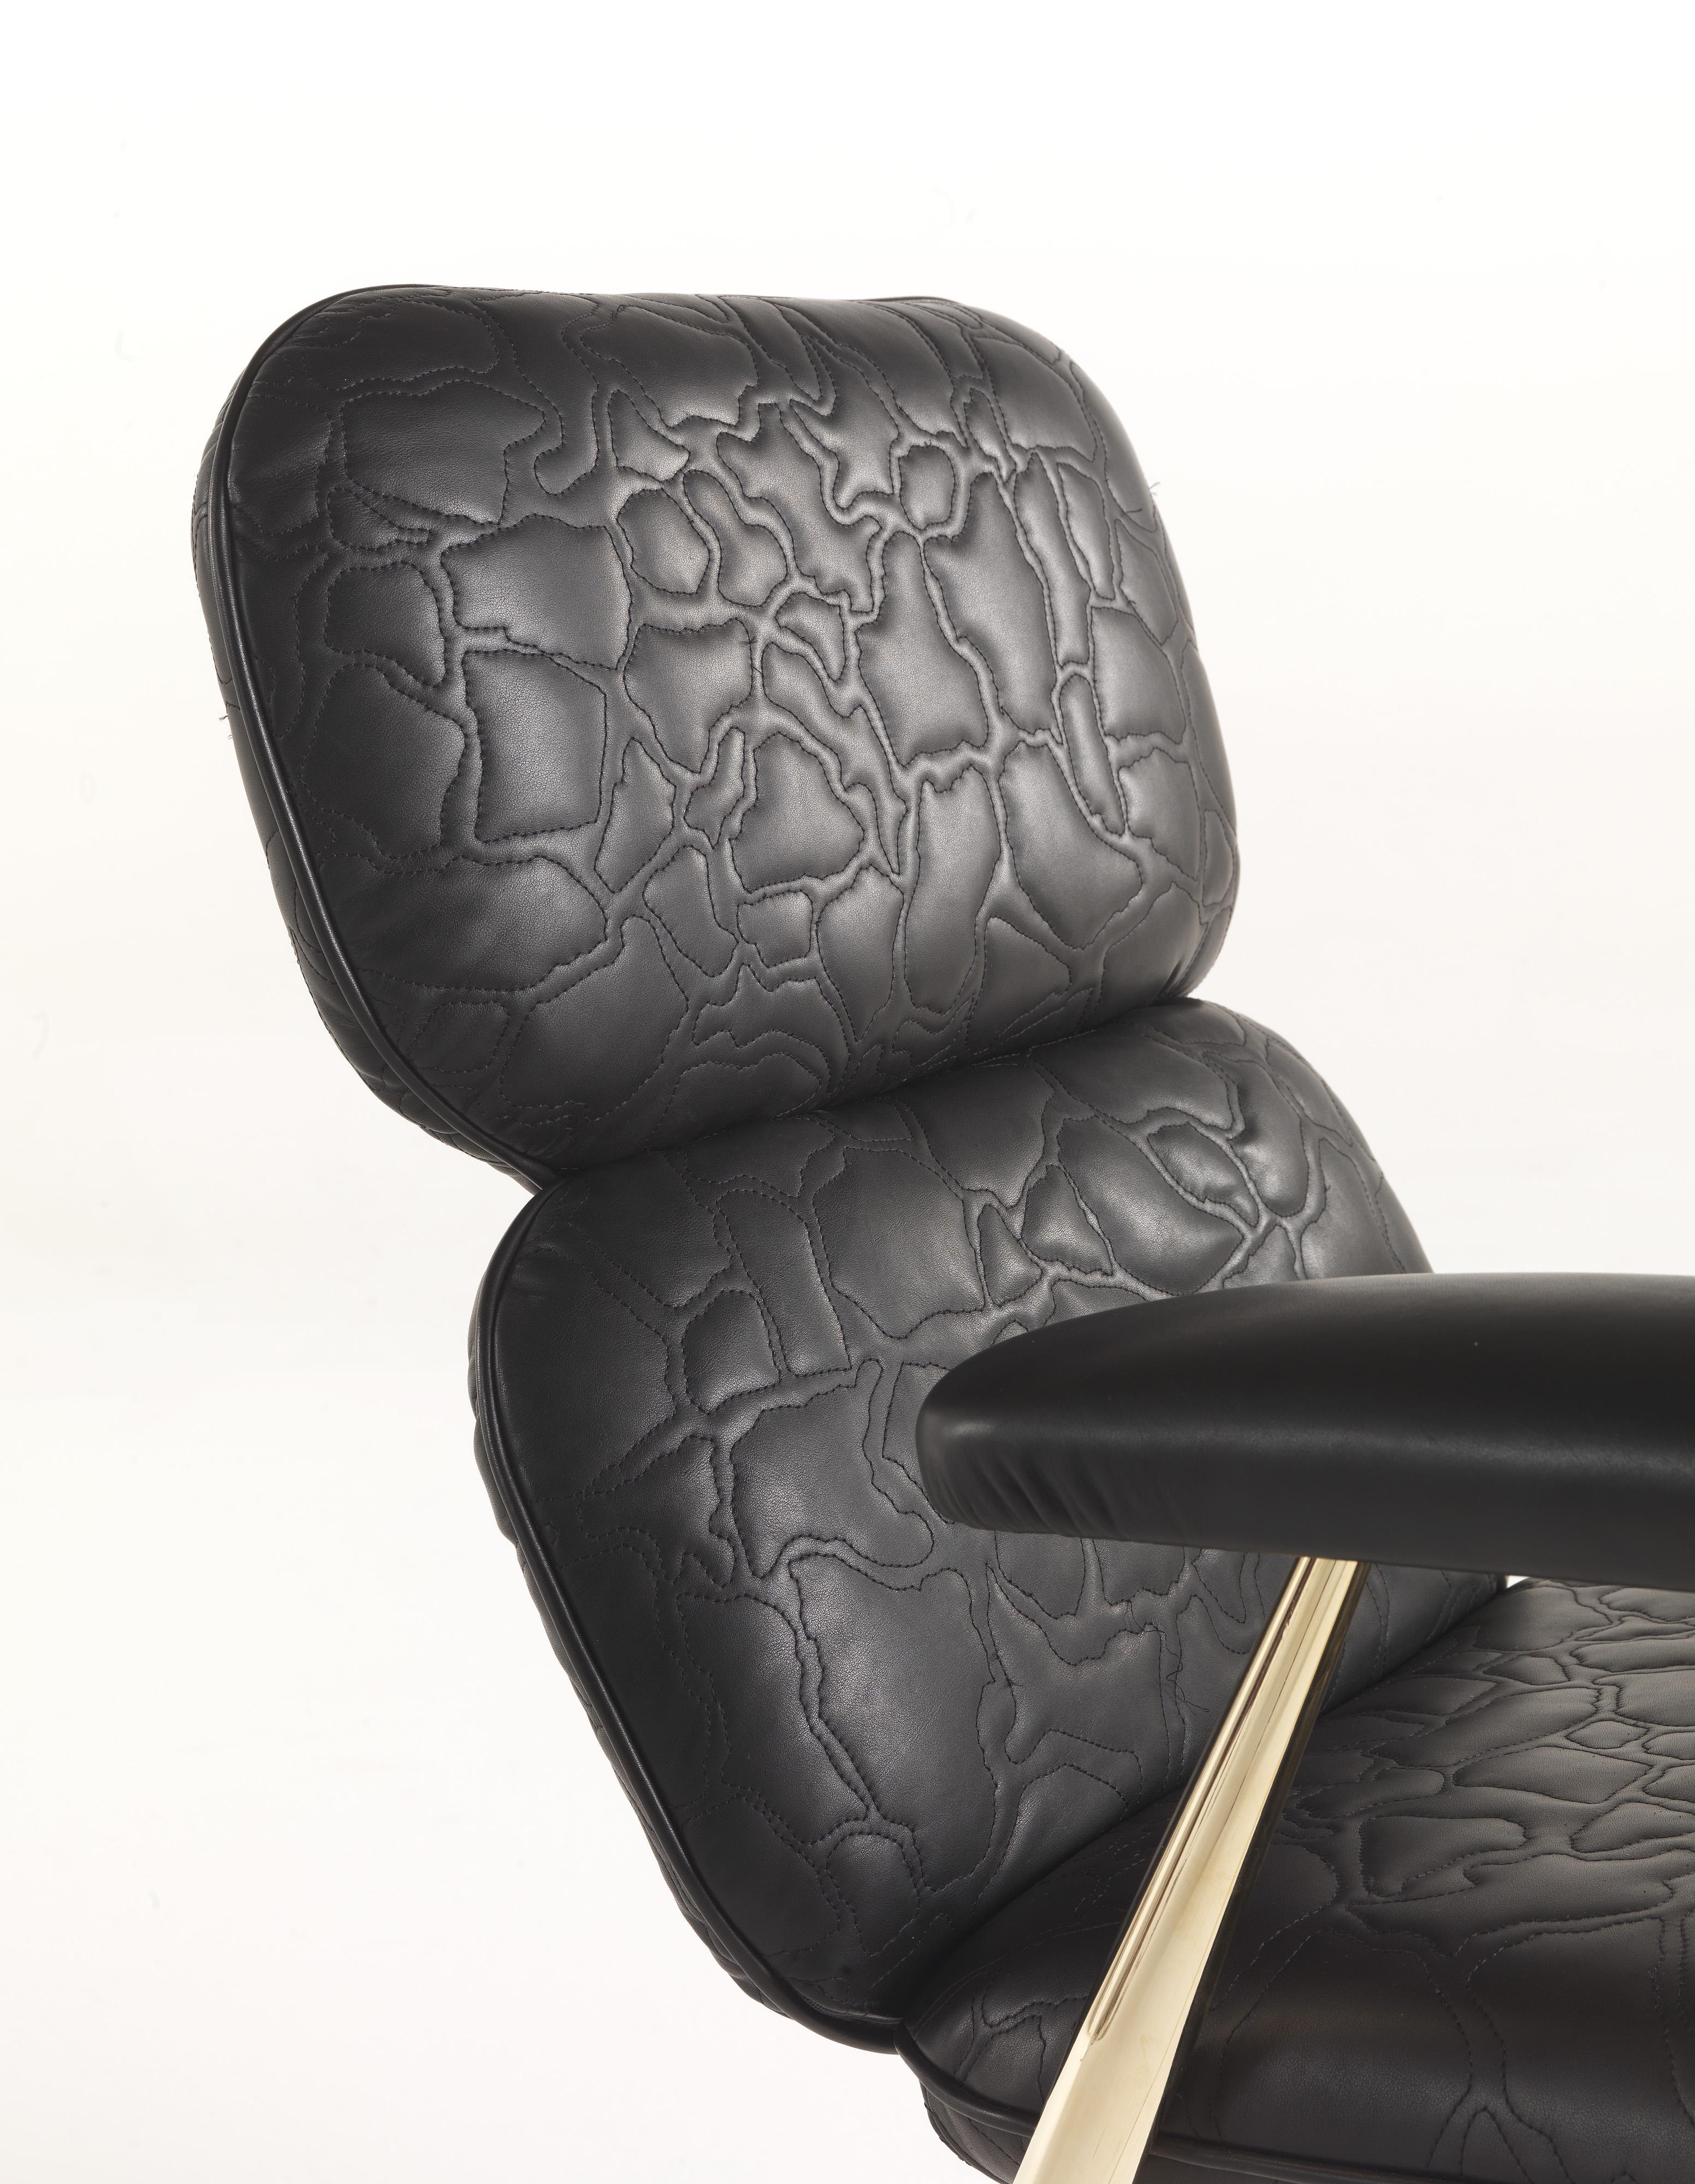 Modern 21st Century Tahiti Chair in Black Leather by Roberto Cavalli Home Interiors For Sale